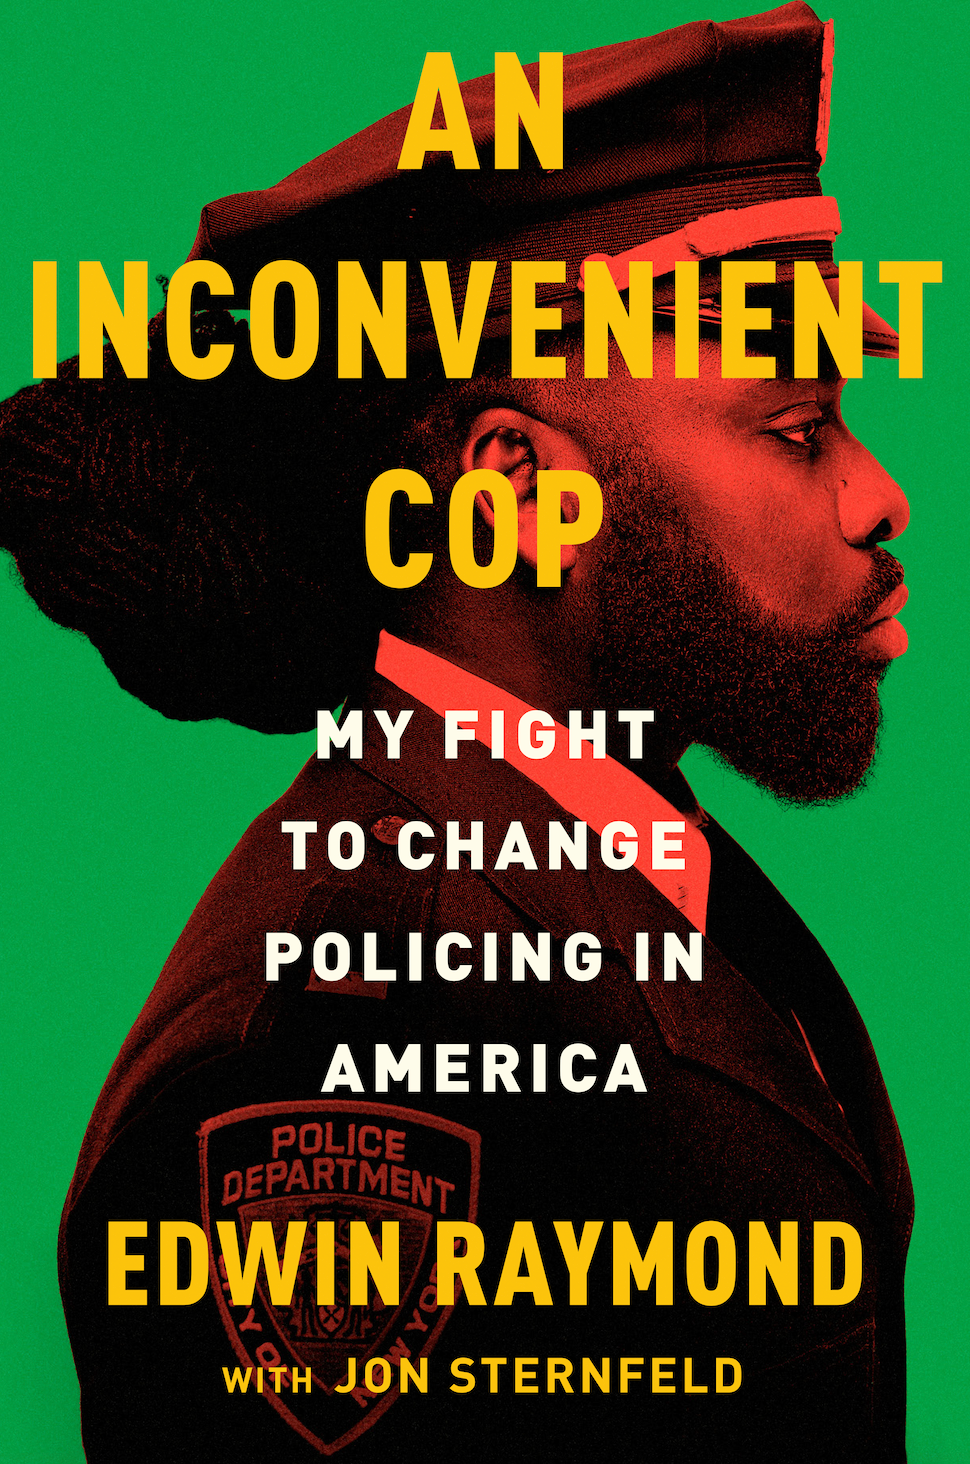 An Inconvenient Cop: My Fight to Change Policing in America (Hardcover)